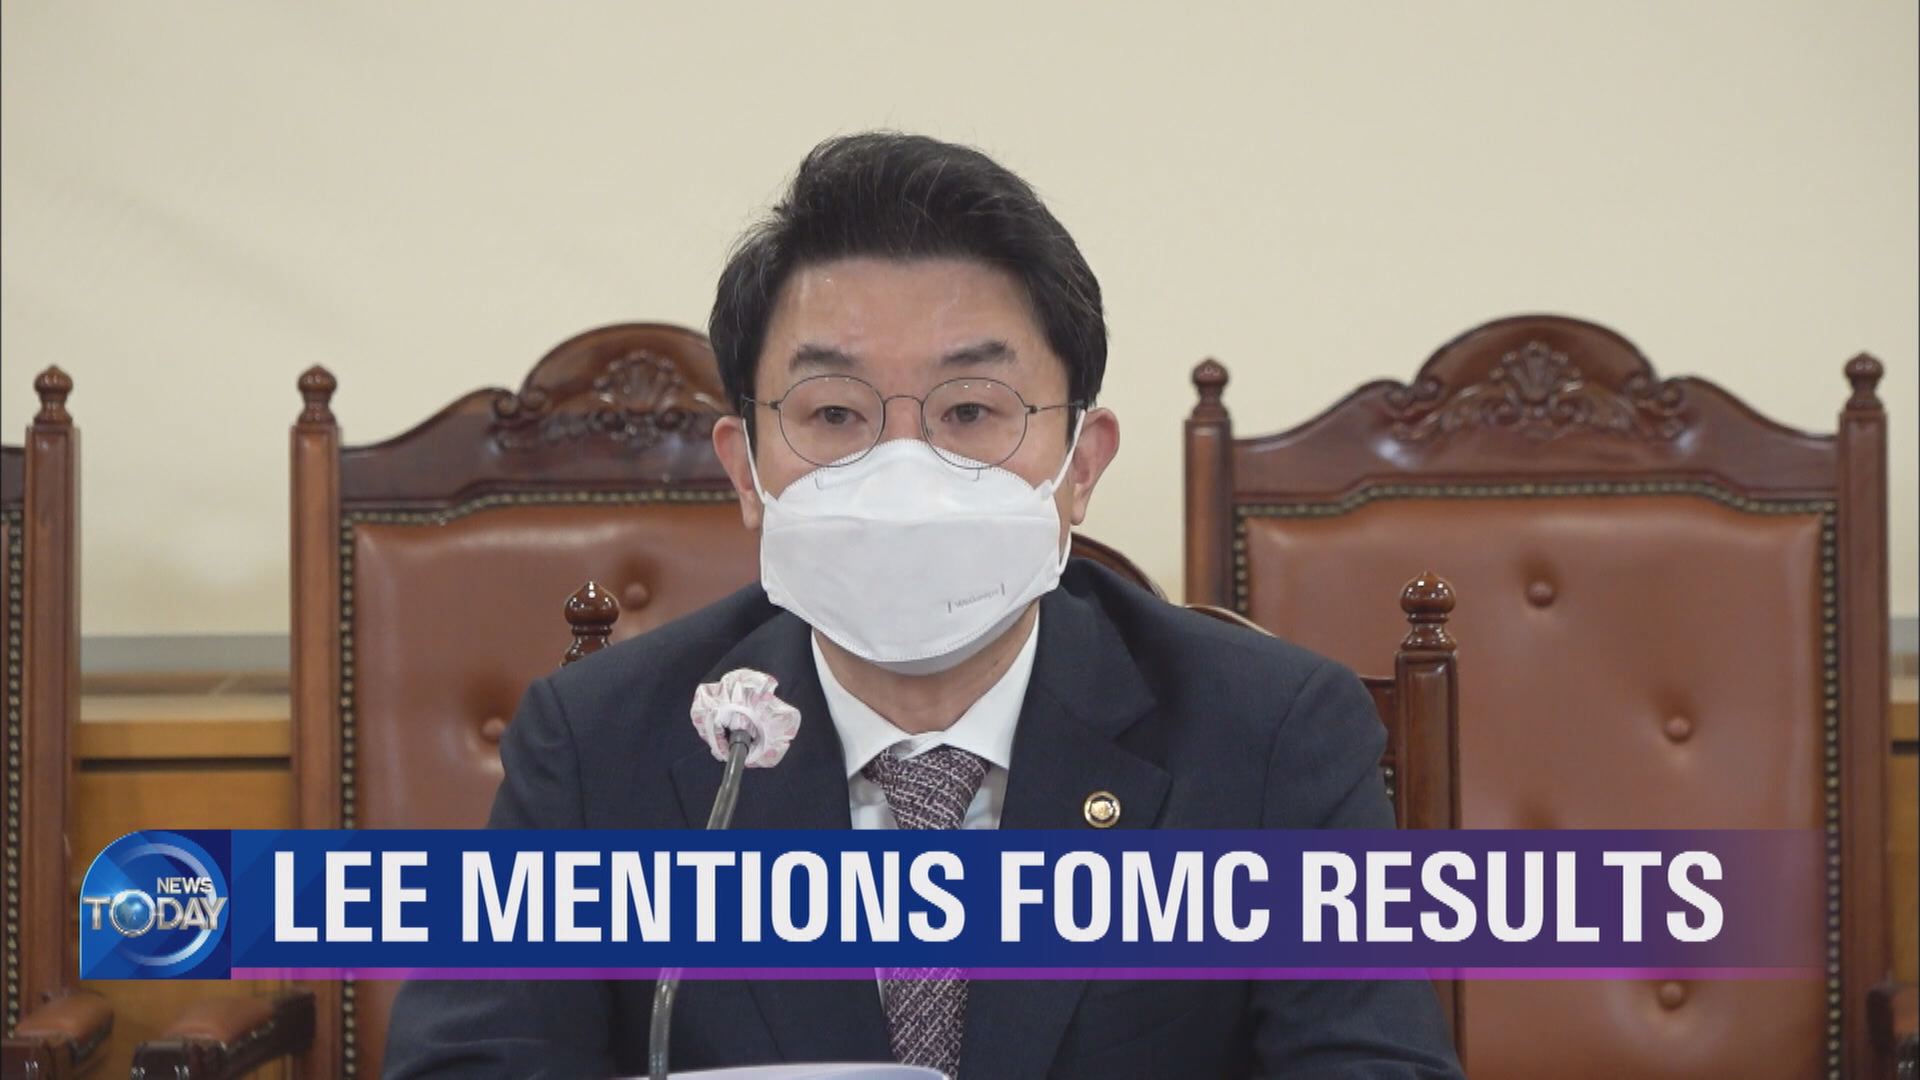 LEE MENTIONS FOMC RESULTS